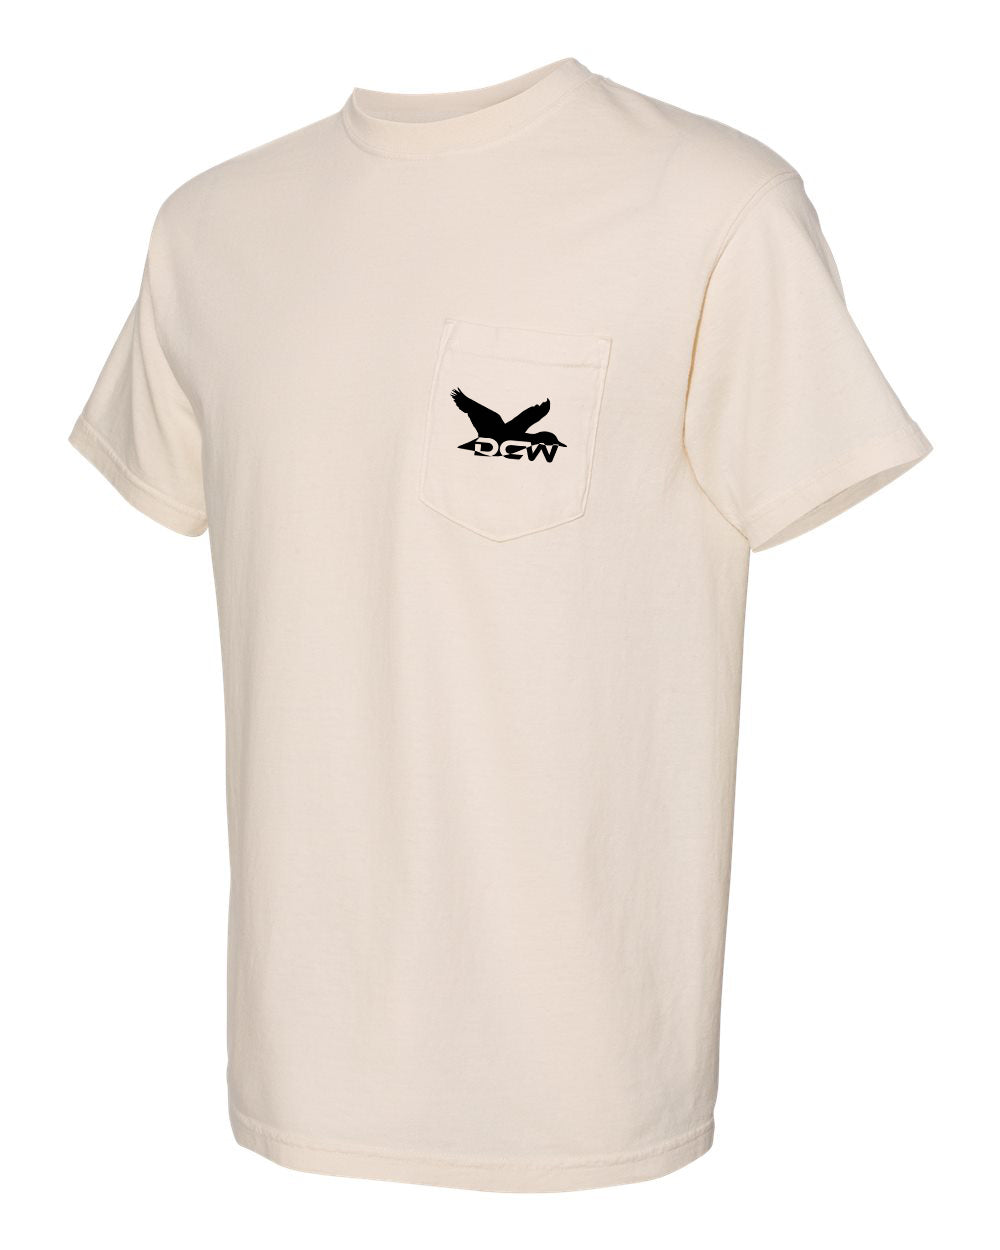 Eyes on the prize - Comfort Colors Pocket Tee